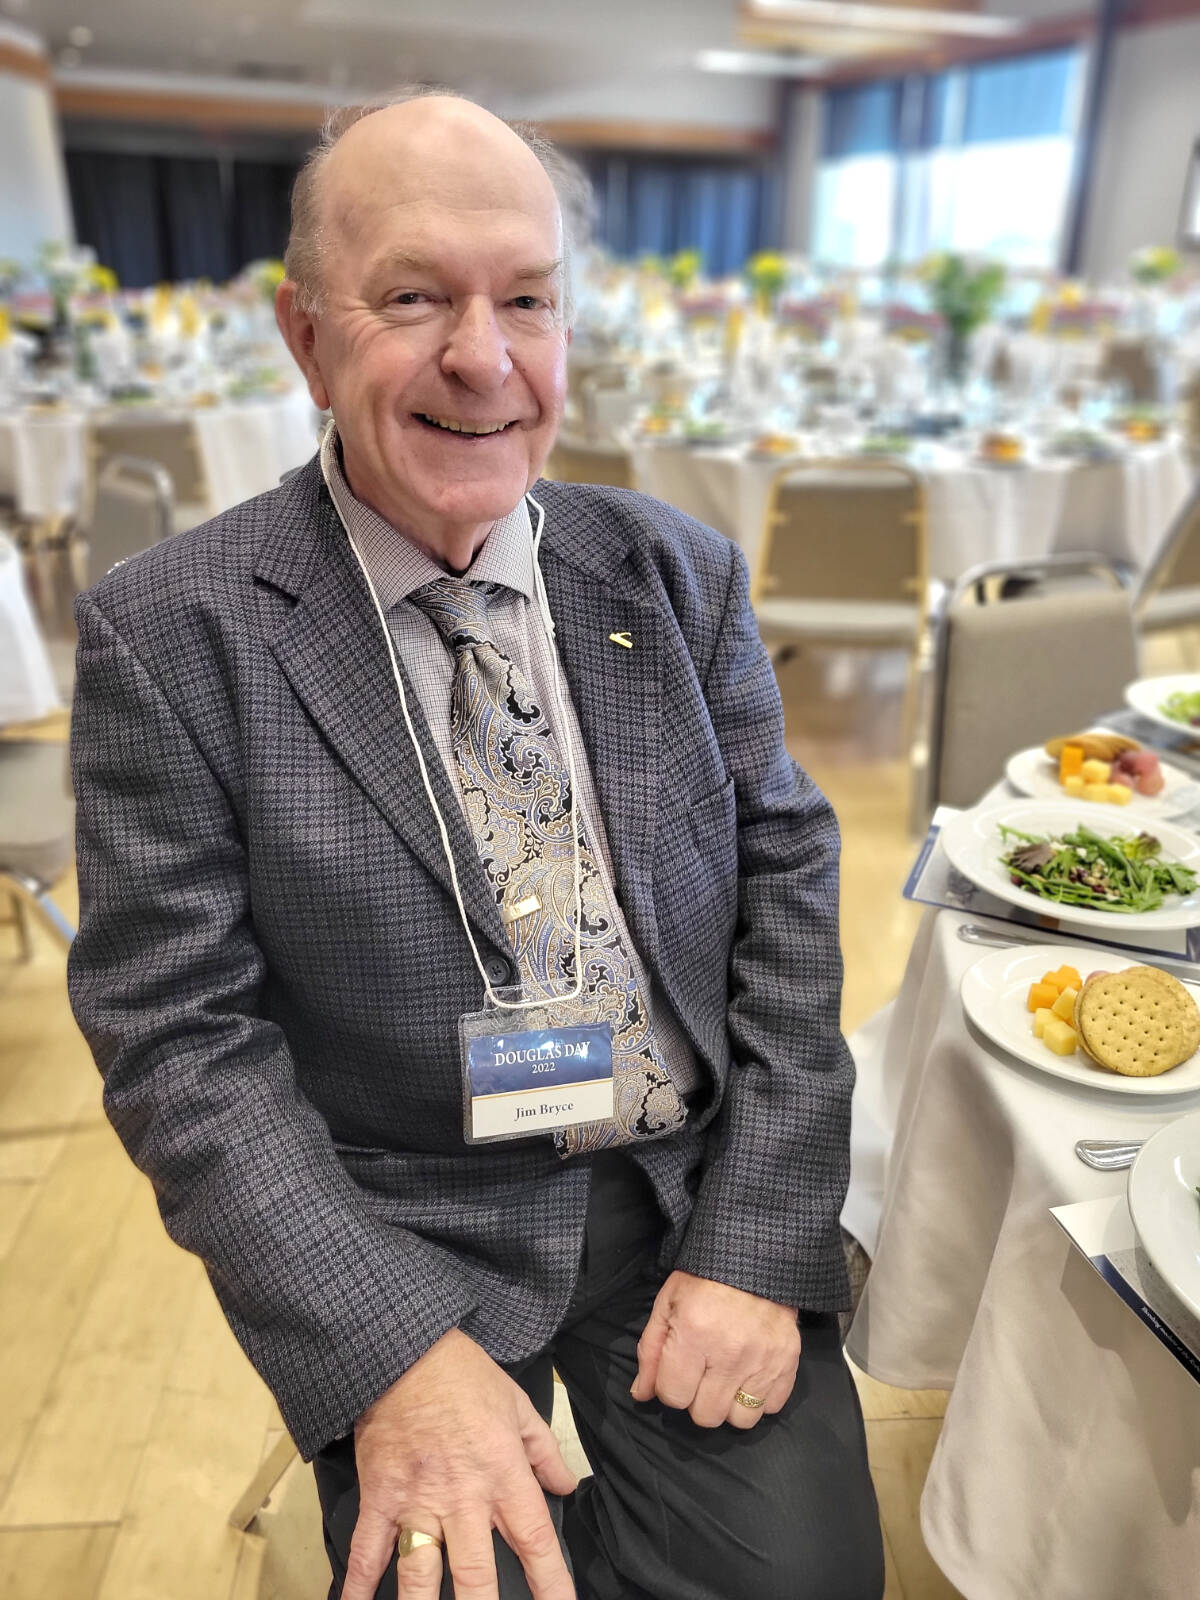 A vigorous Jim Bryce said he wanted to get some exercise, so he didnt take the elevator to the third floor banquet hall, at LEC, opting to walk up the stairs instead. Bryce was among 226 seniors and spouses, along with 115 dignitaries and invited guests who attended the Douglas Day 2022 pioneers banquet on Saturday, Nov. 19 at the Langley Events Centre. (Dan Ferguson/Langley Advance Times)